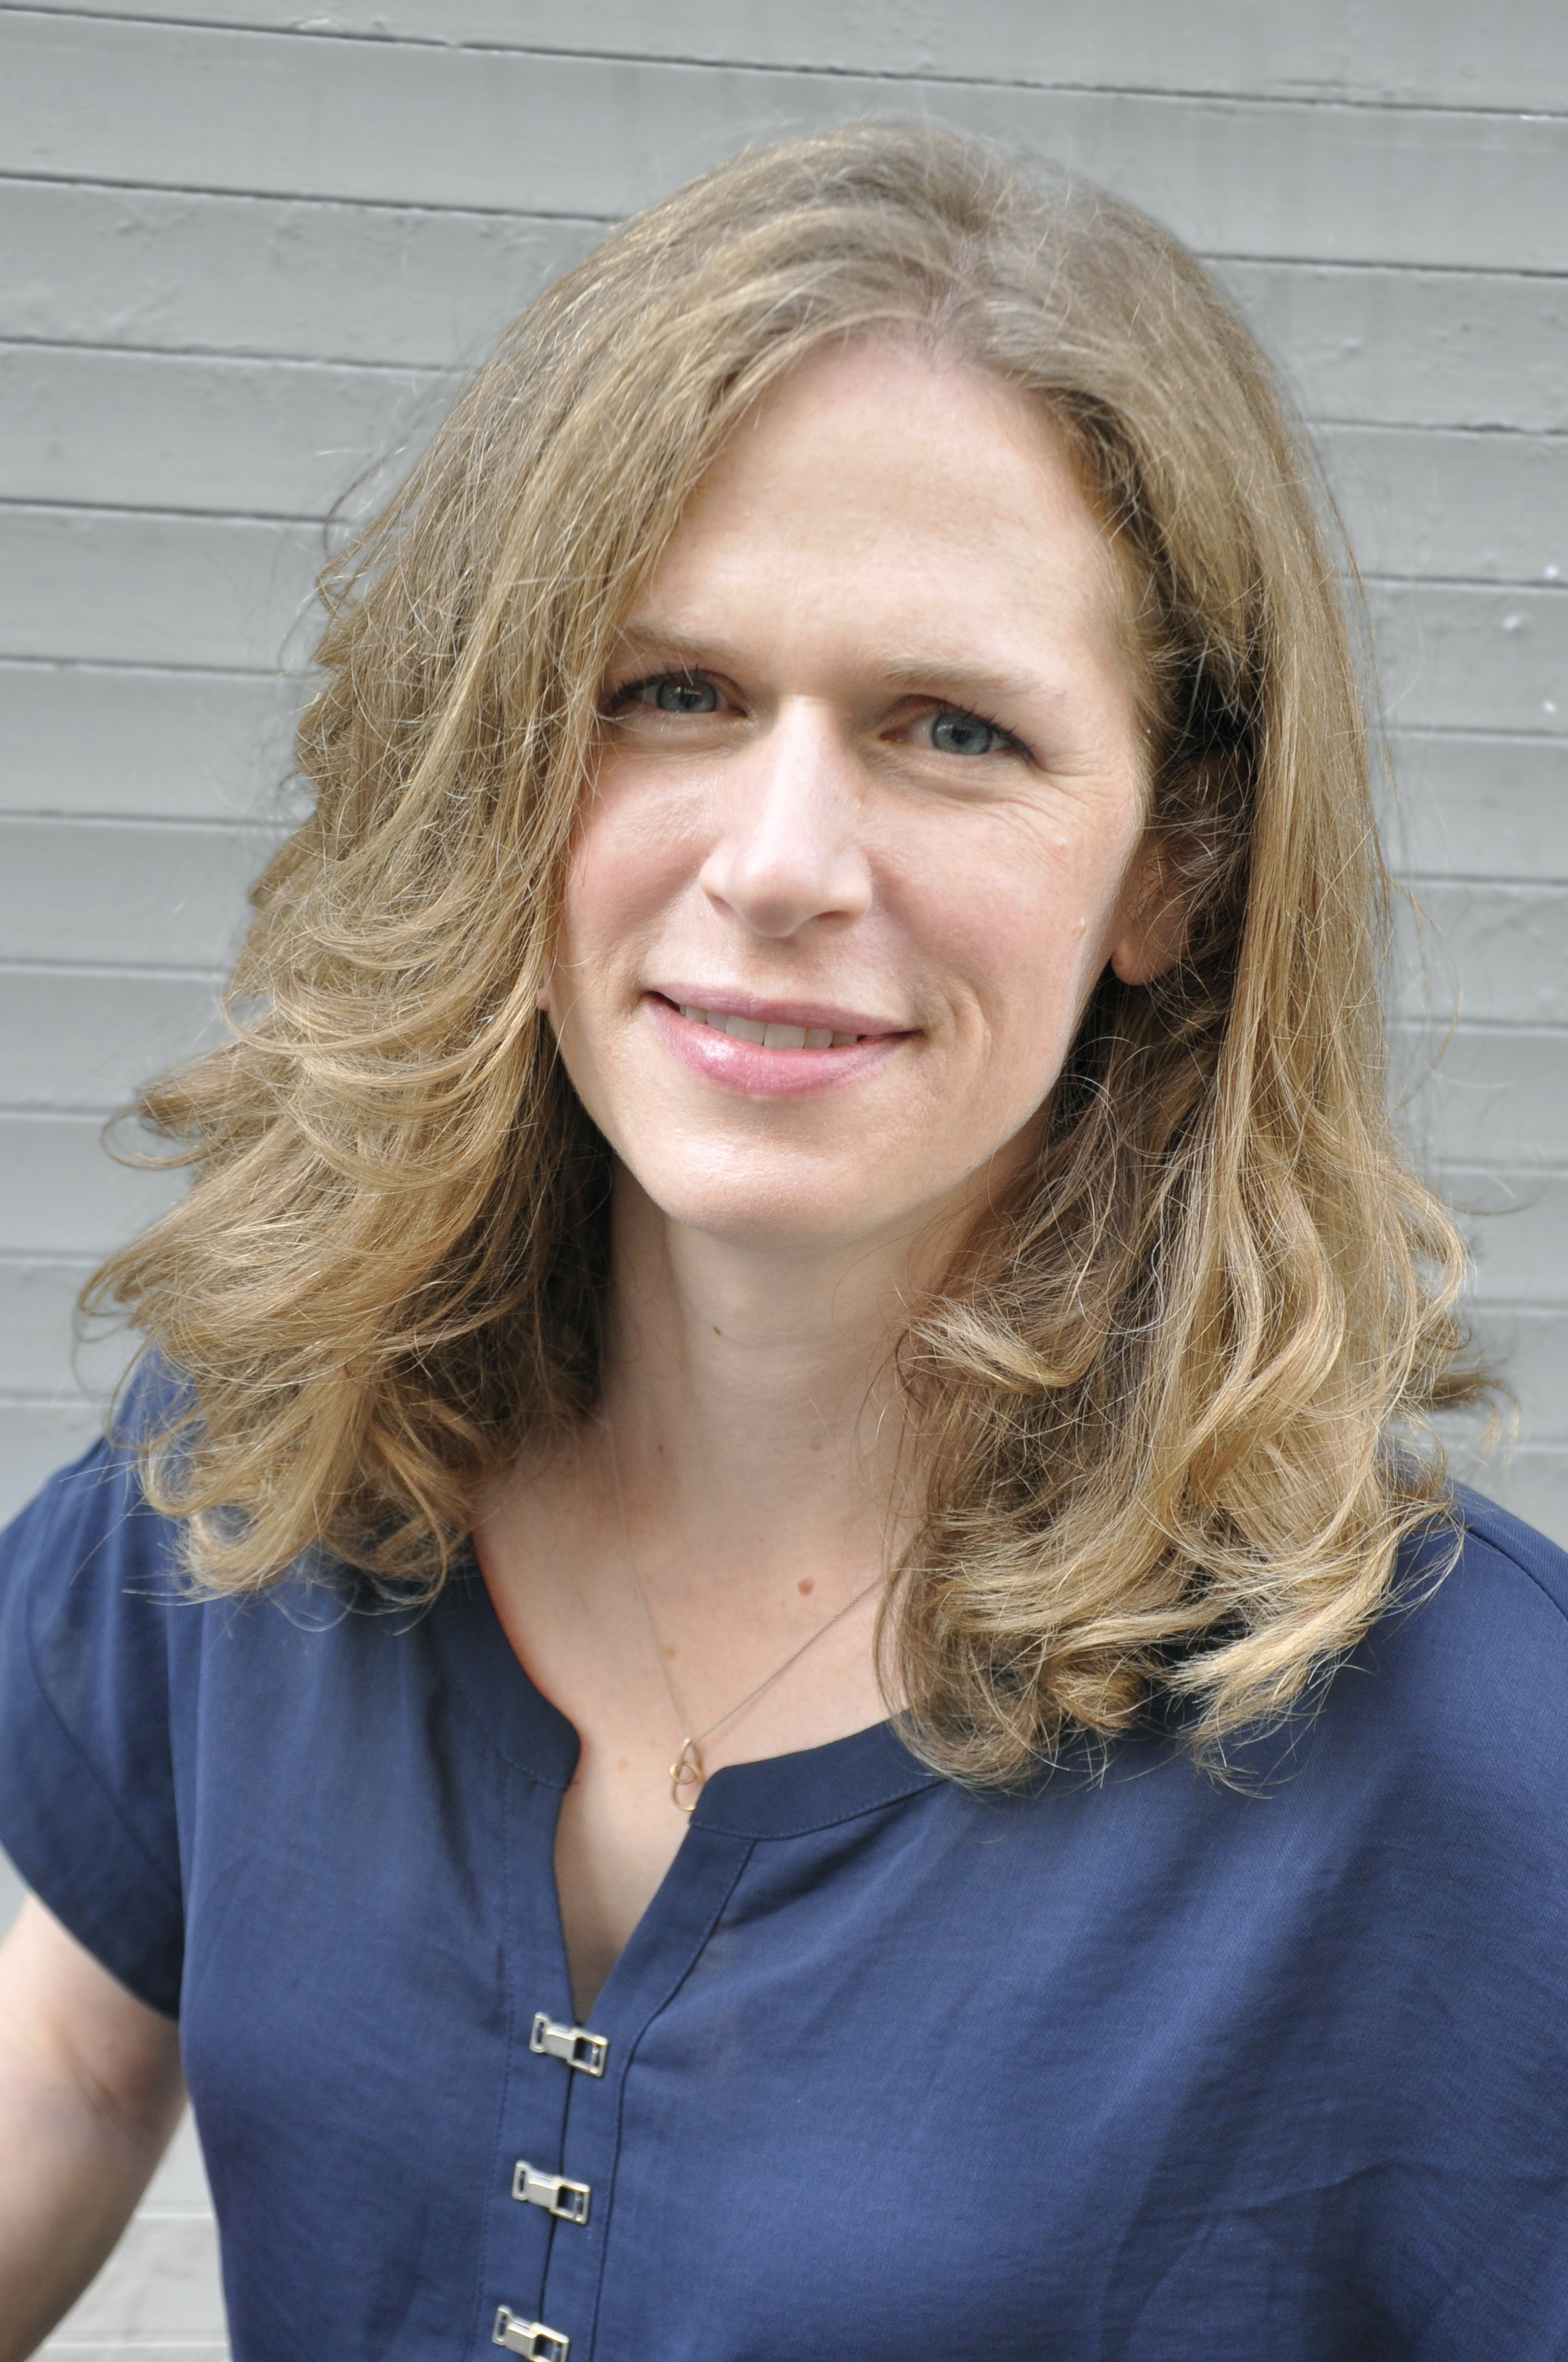 Photograph of author Chelsea Wald / (c) Cathleen Owens